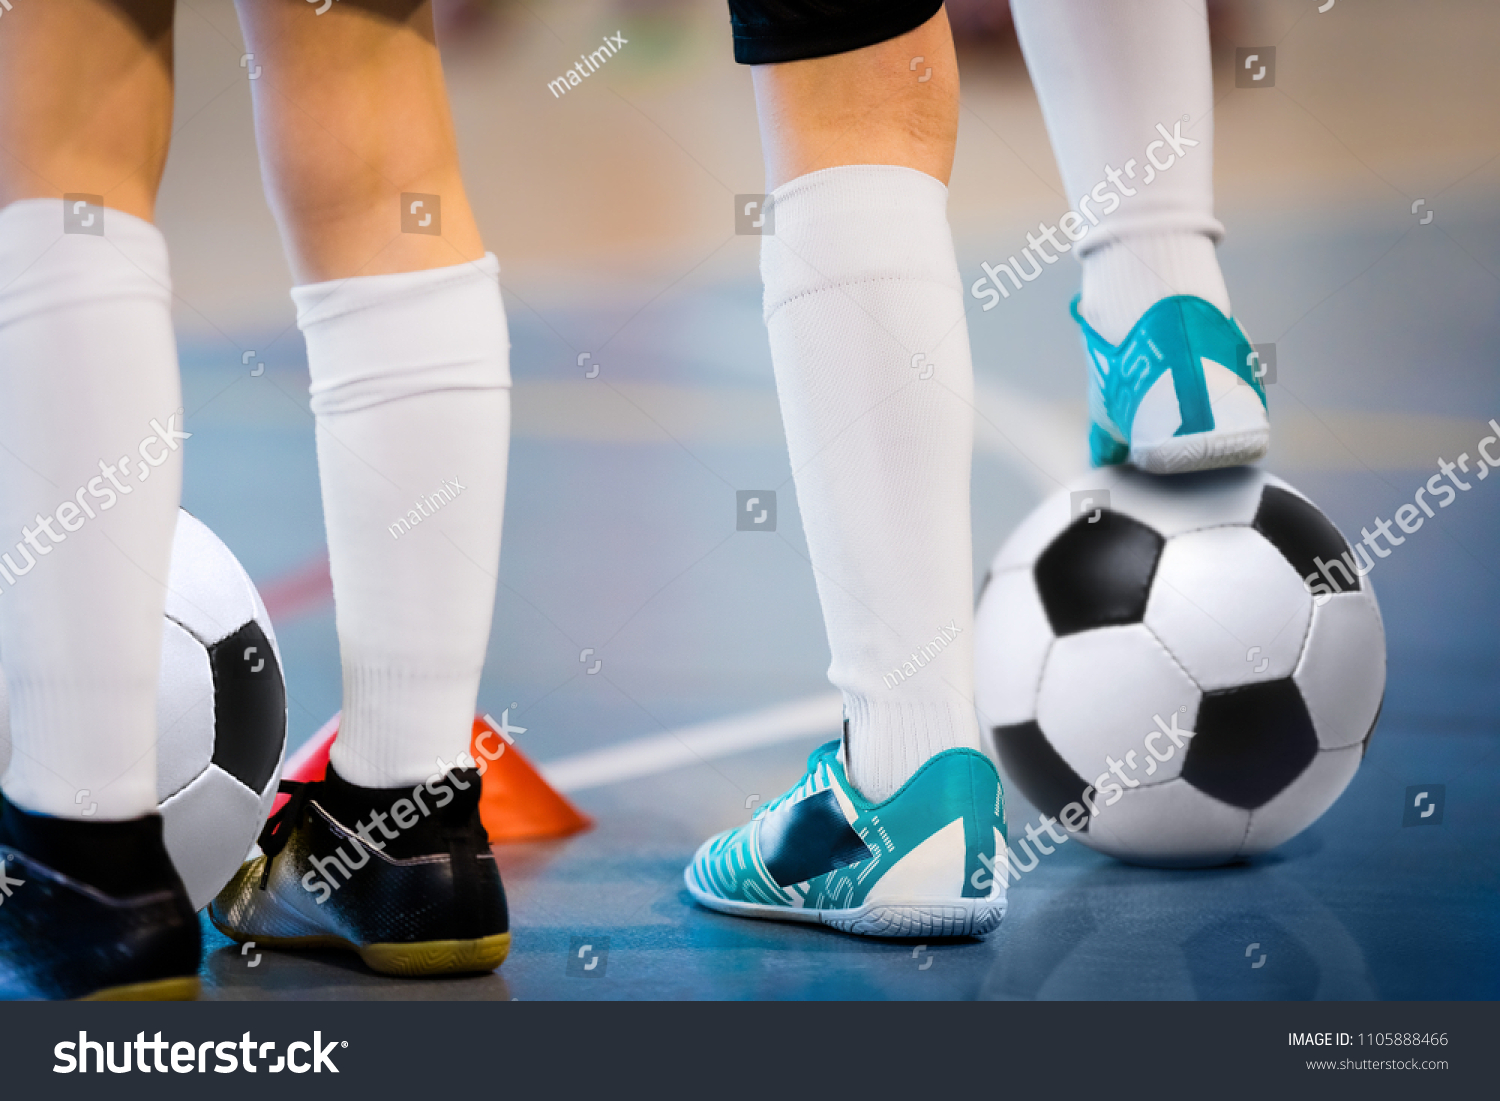 Indoor soccer players training with balls. Indoor soccer sports hall. Football futsal player, ball, futsal floor. Sports background. Futsal league. Indoor football players with classic soccer ball. #1105888466